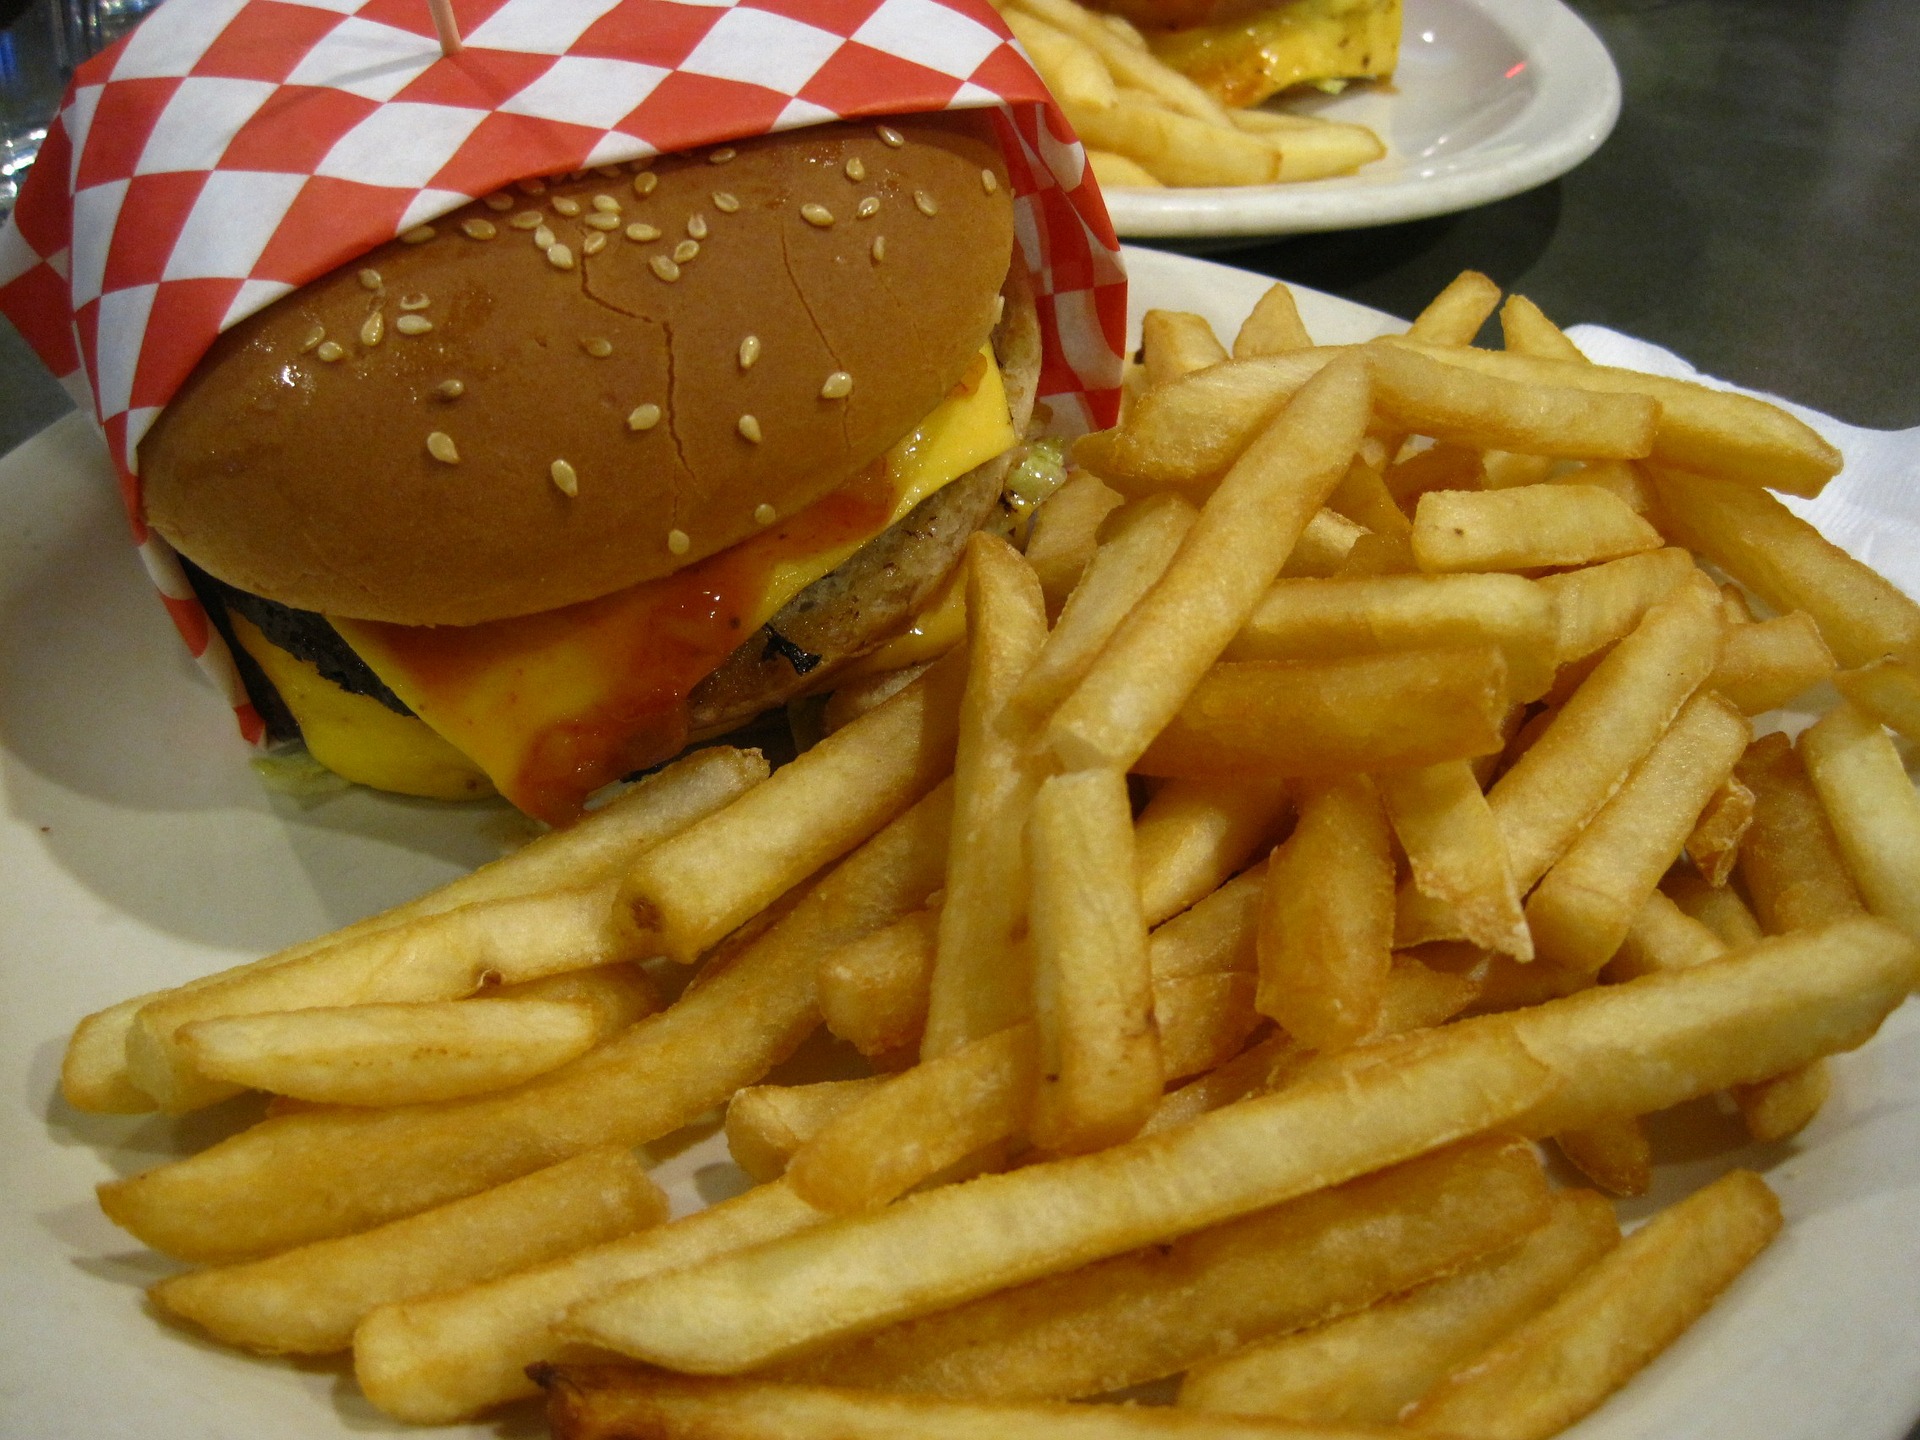 hamburgers french fries bad diet worse than smoking poor diet responsible for deaths globally than tobacco high blood pressure other health risks